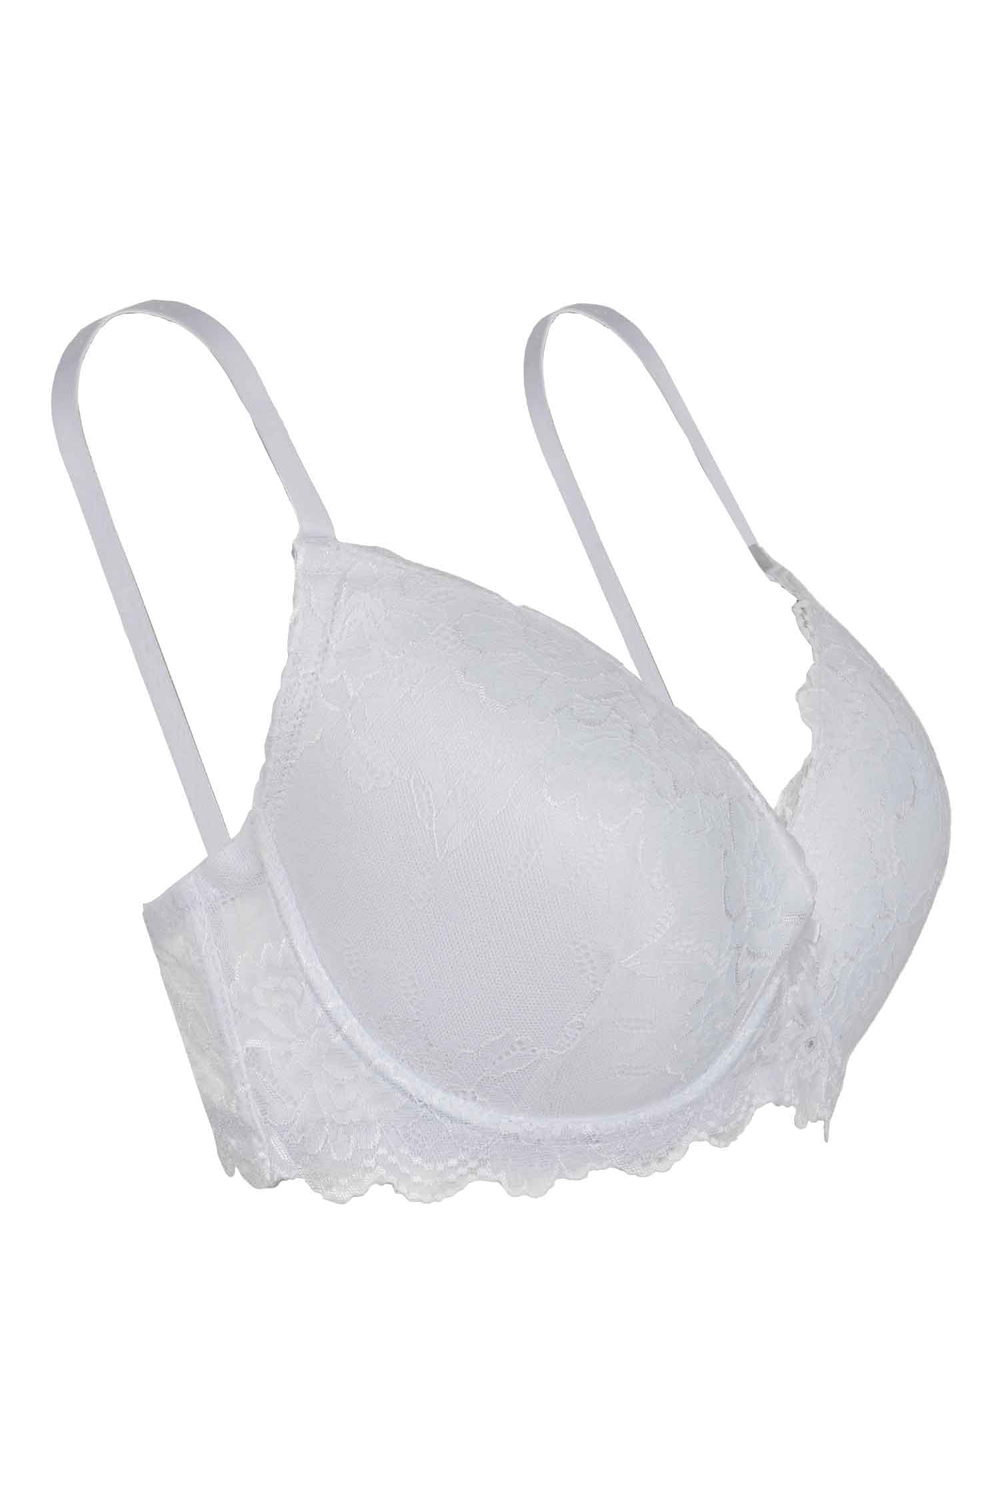 Buy Great Mother lace Plus Size Bra Sweat Push up Large Breast Wife  Girlfriend Mother 38 40 42 44 46 C D DD E Cup Bra B7 B8 White Cup Size E